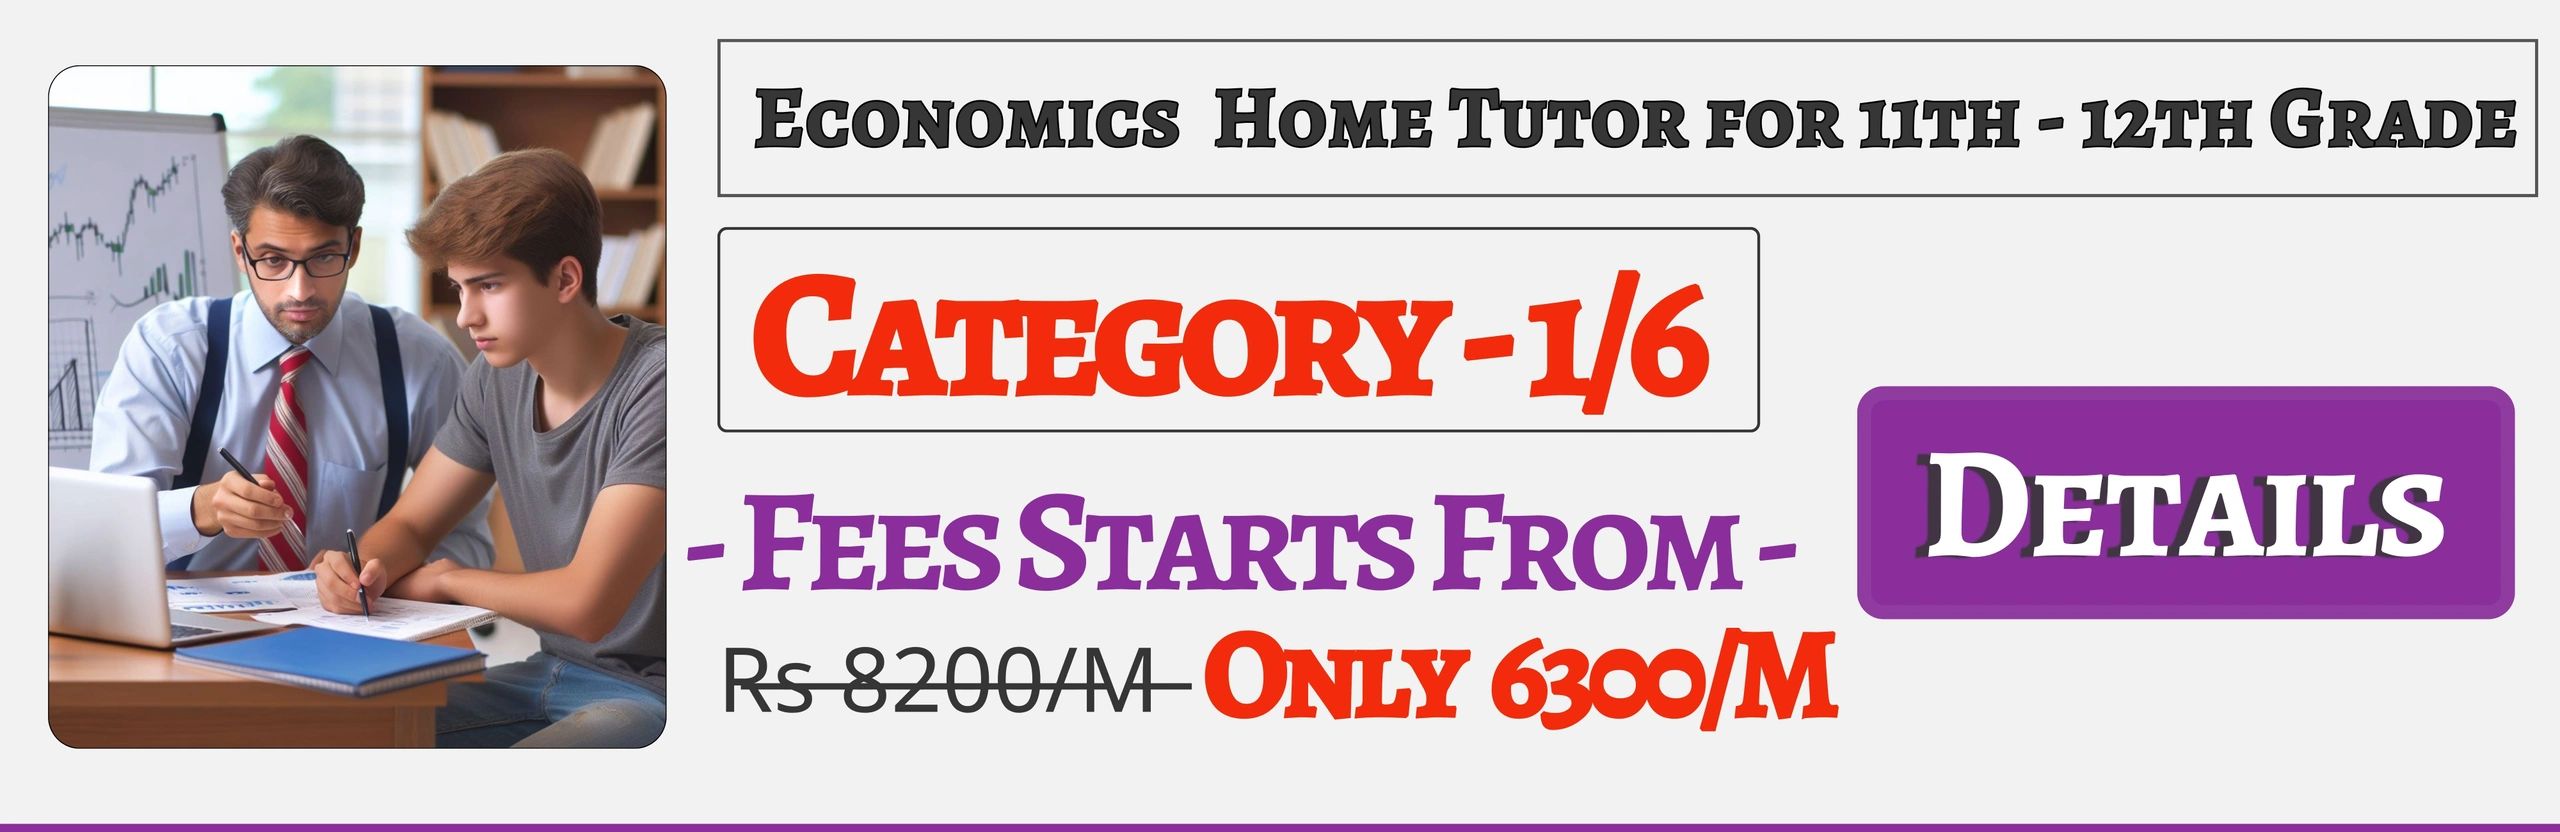 Book Best Nearby Economics Home Tuition Tutors For 11th & 12th Jaipur ,Fees Only 6300/M